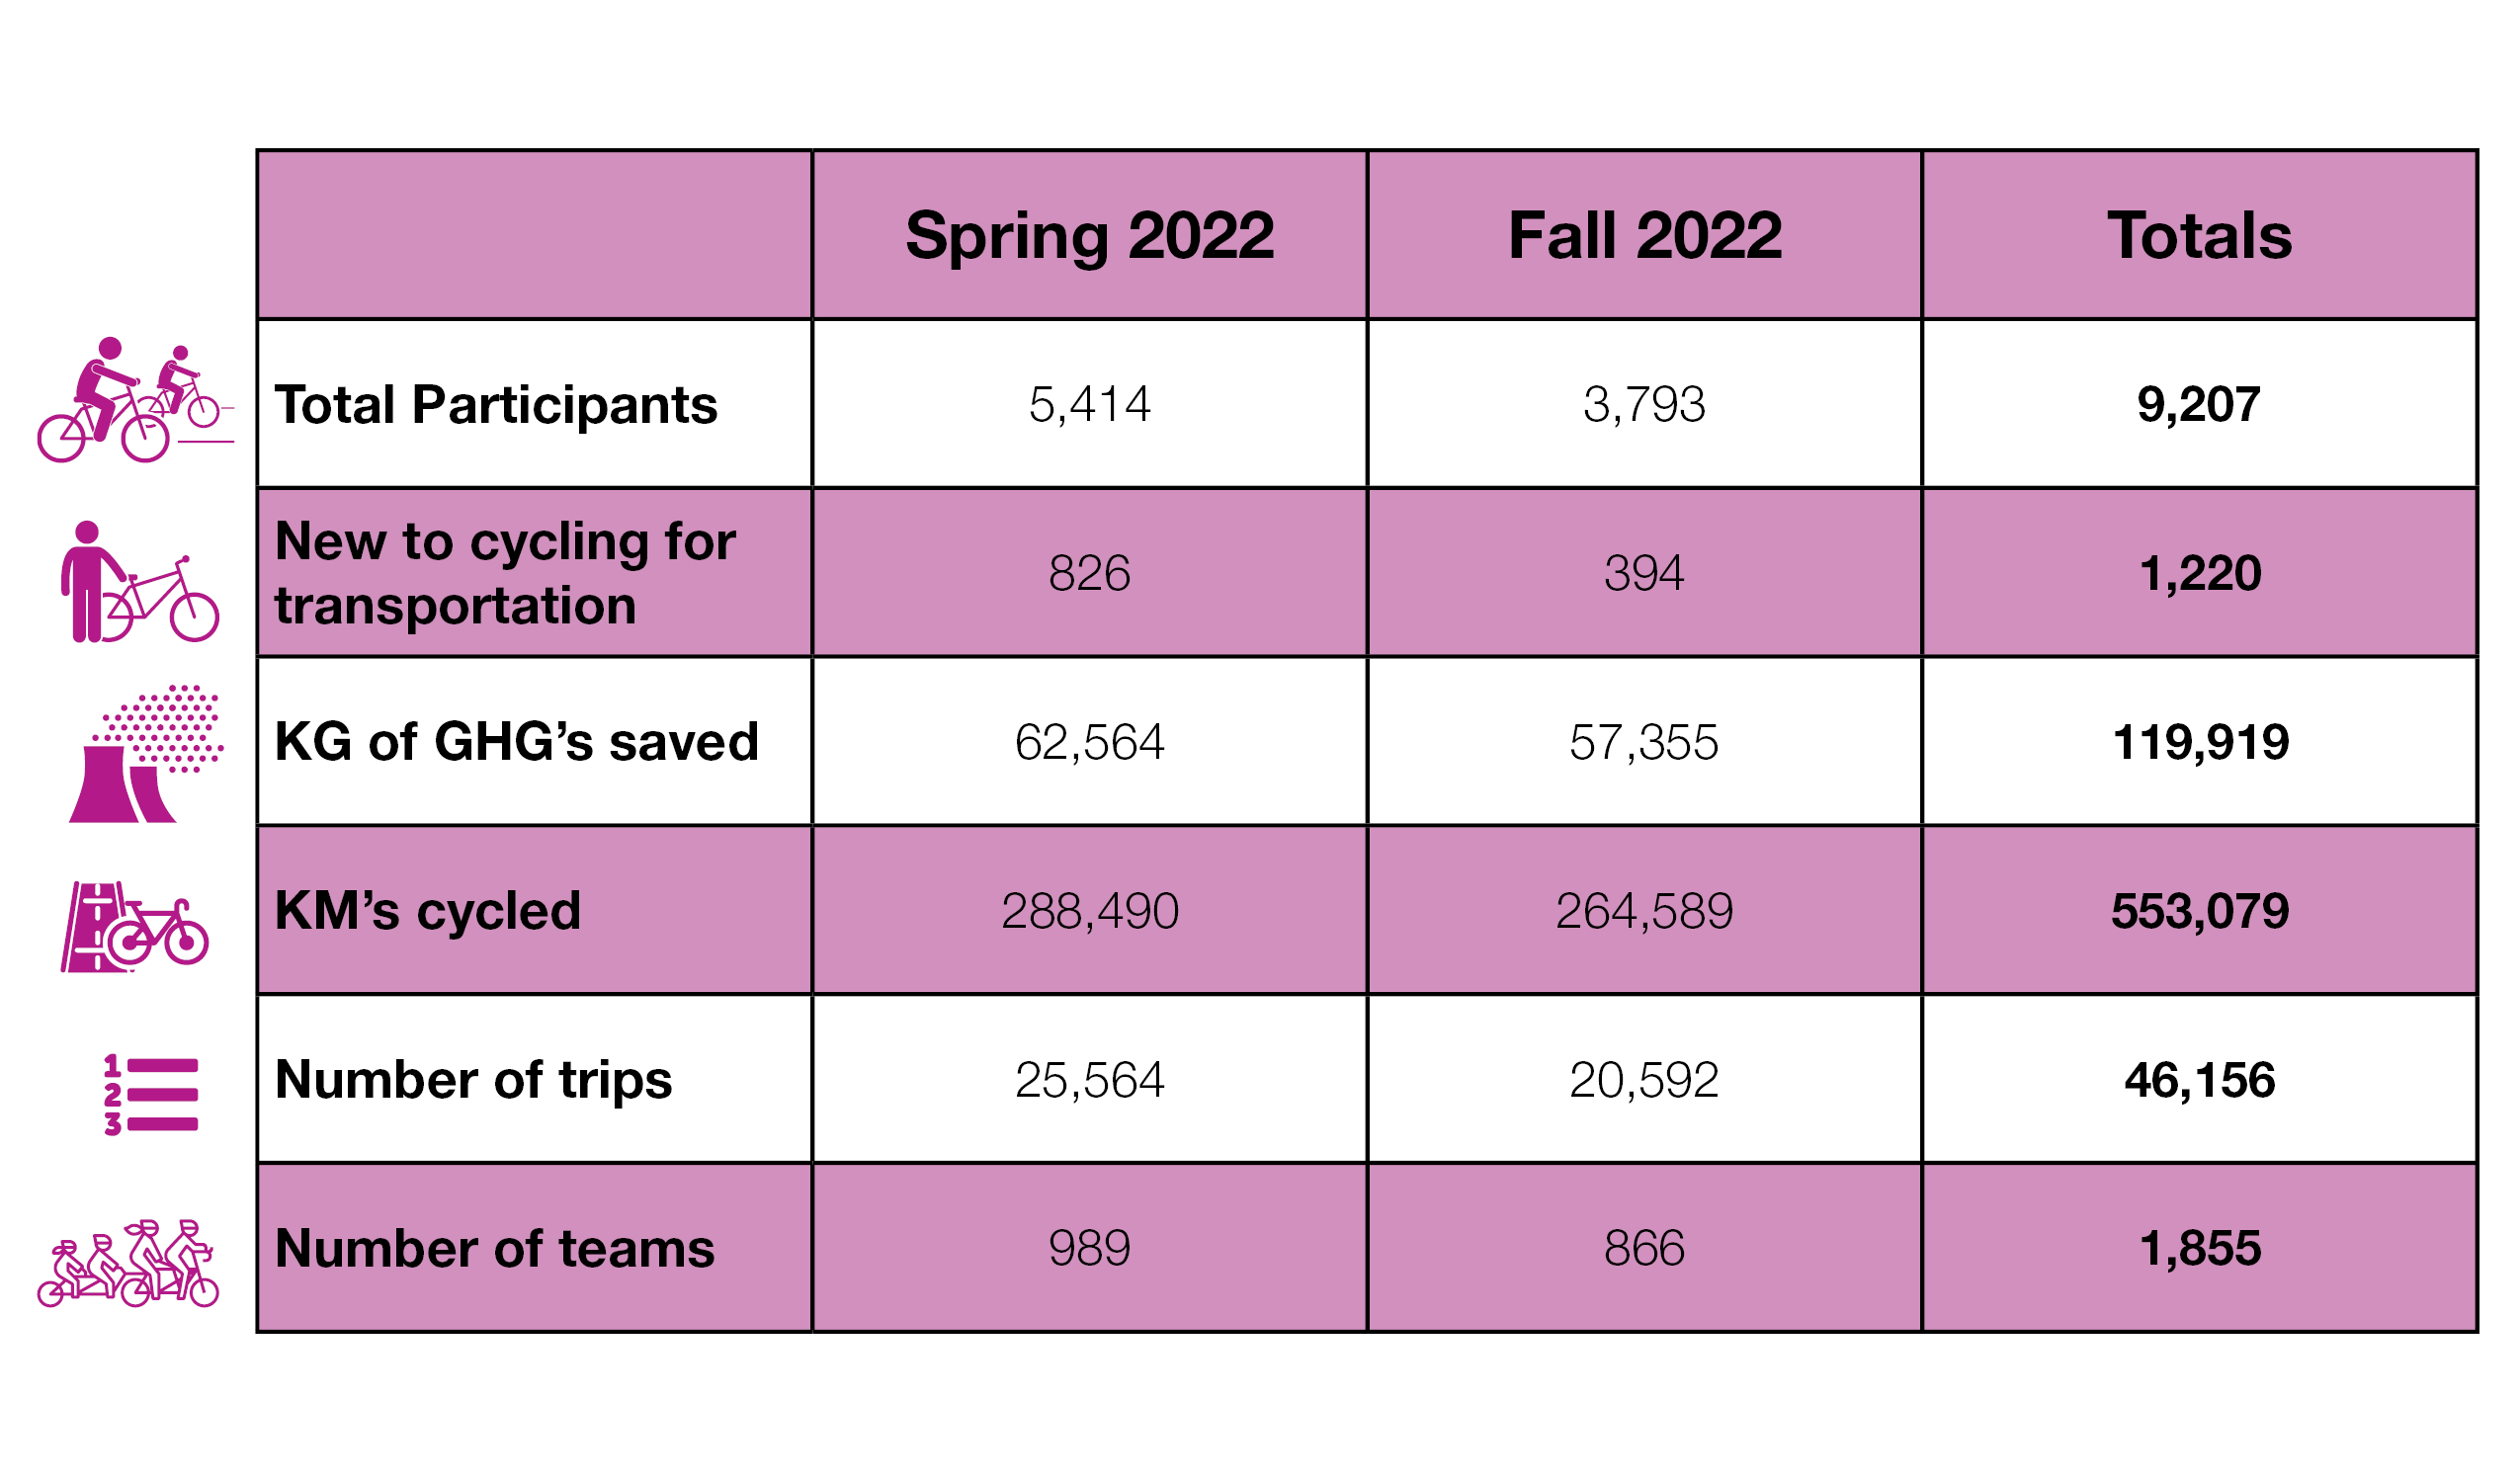 A table featuring key statistics from Spring and Fall 2022 Go by Bike Week's. Across both events, there were 9,207 total participants, 1,220 people new to cycling for transportation, a total of 119,919 KG of GHG's saved, 553,079 KM's cycled, 45,156 bike trips and 1,855 teams.